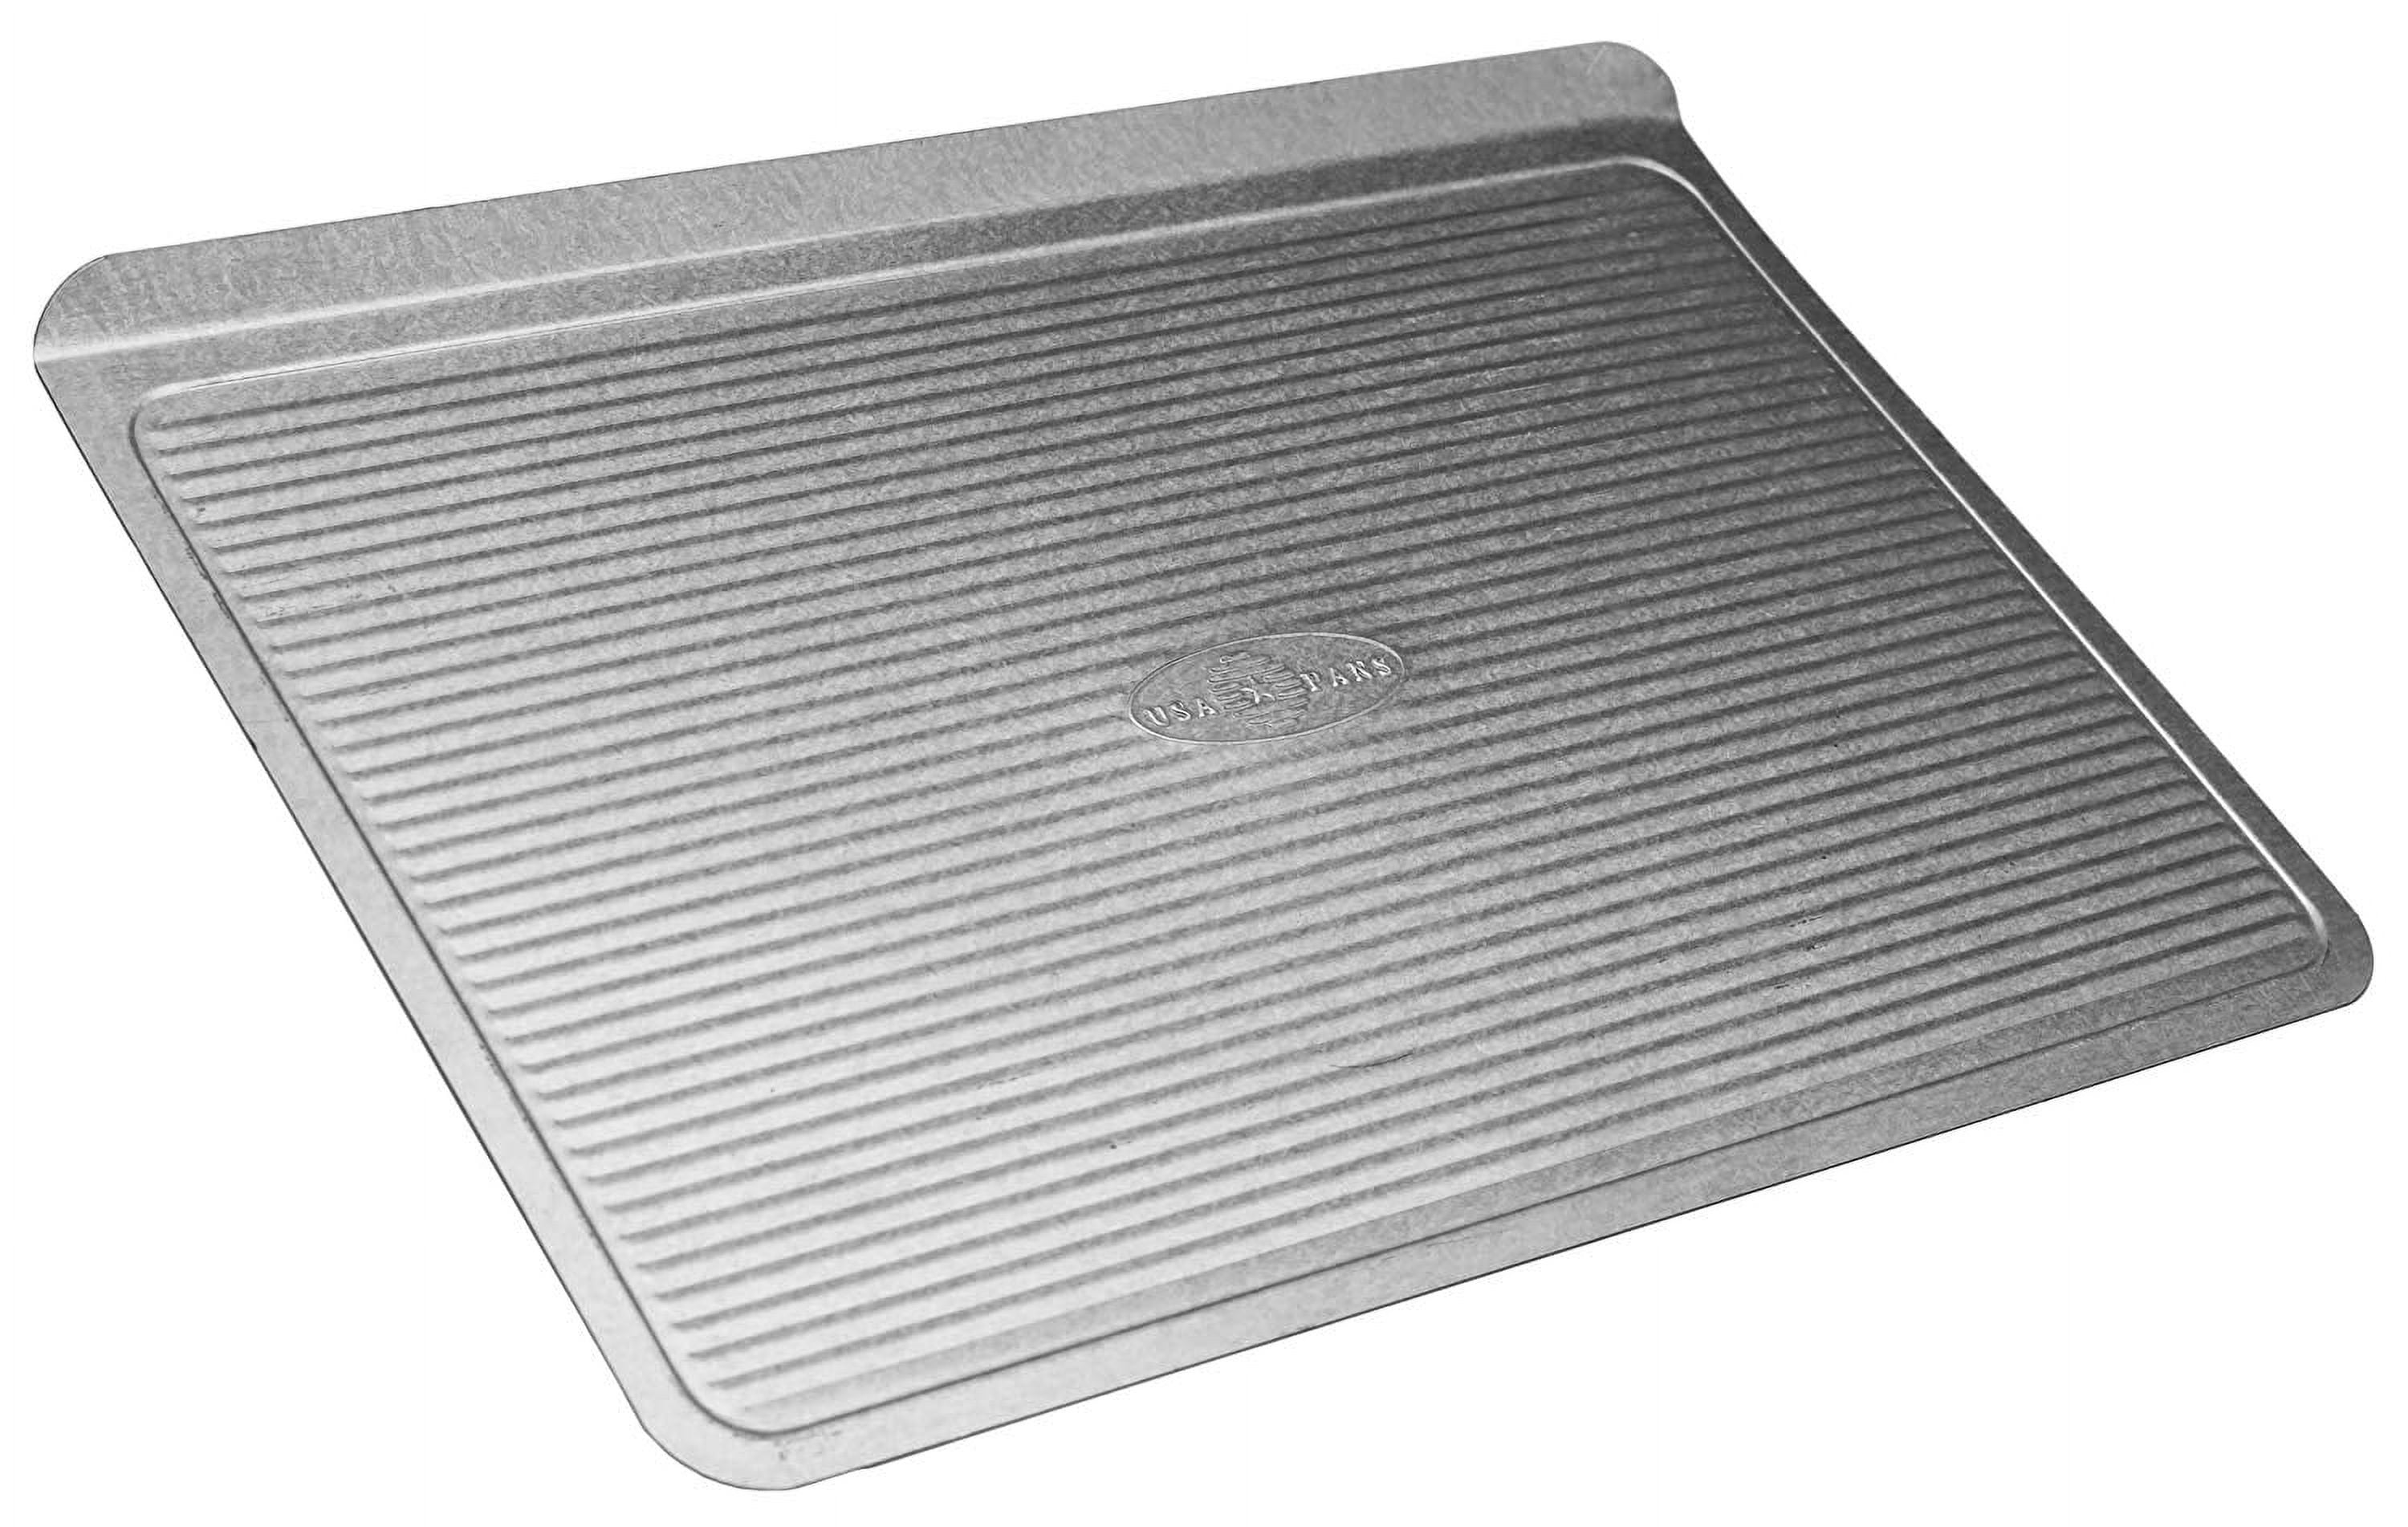 6406946 17 X 12.25 In. Cookie & Jelly Roll Pan - Pack Of 6